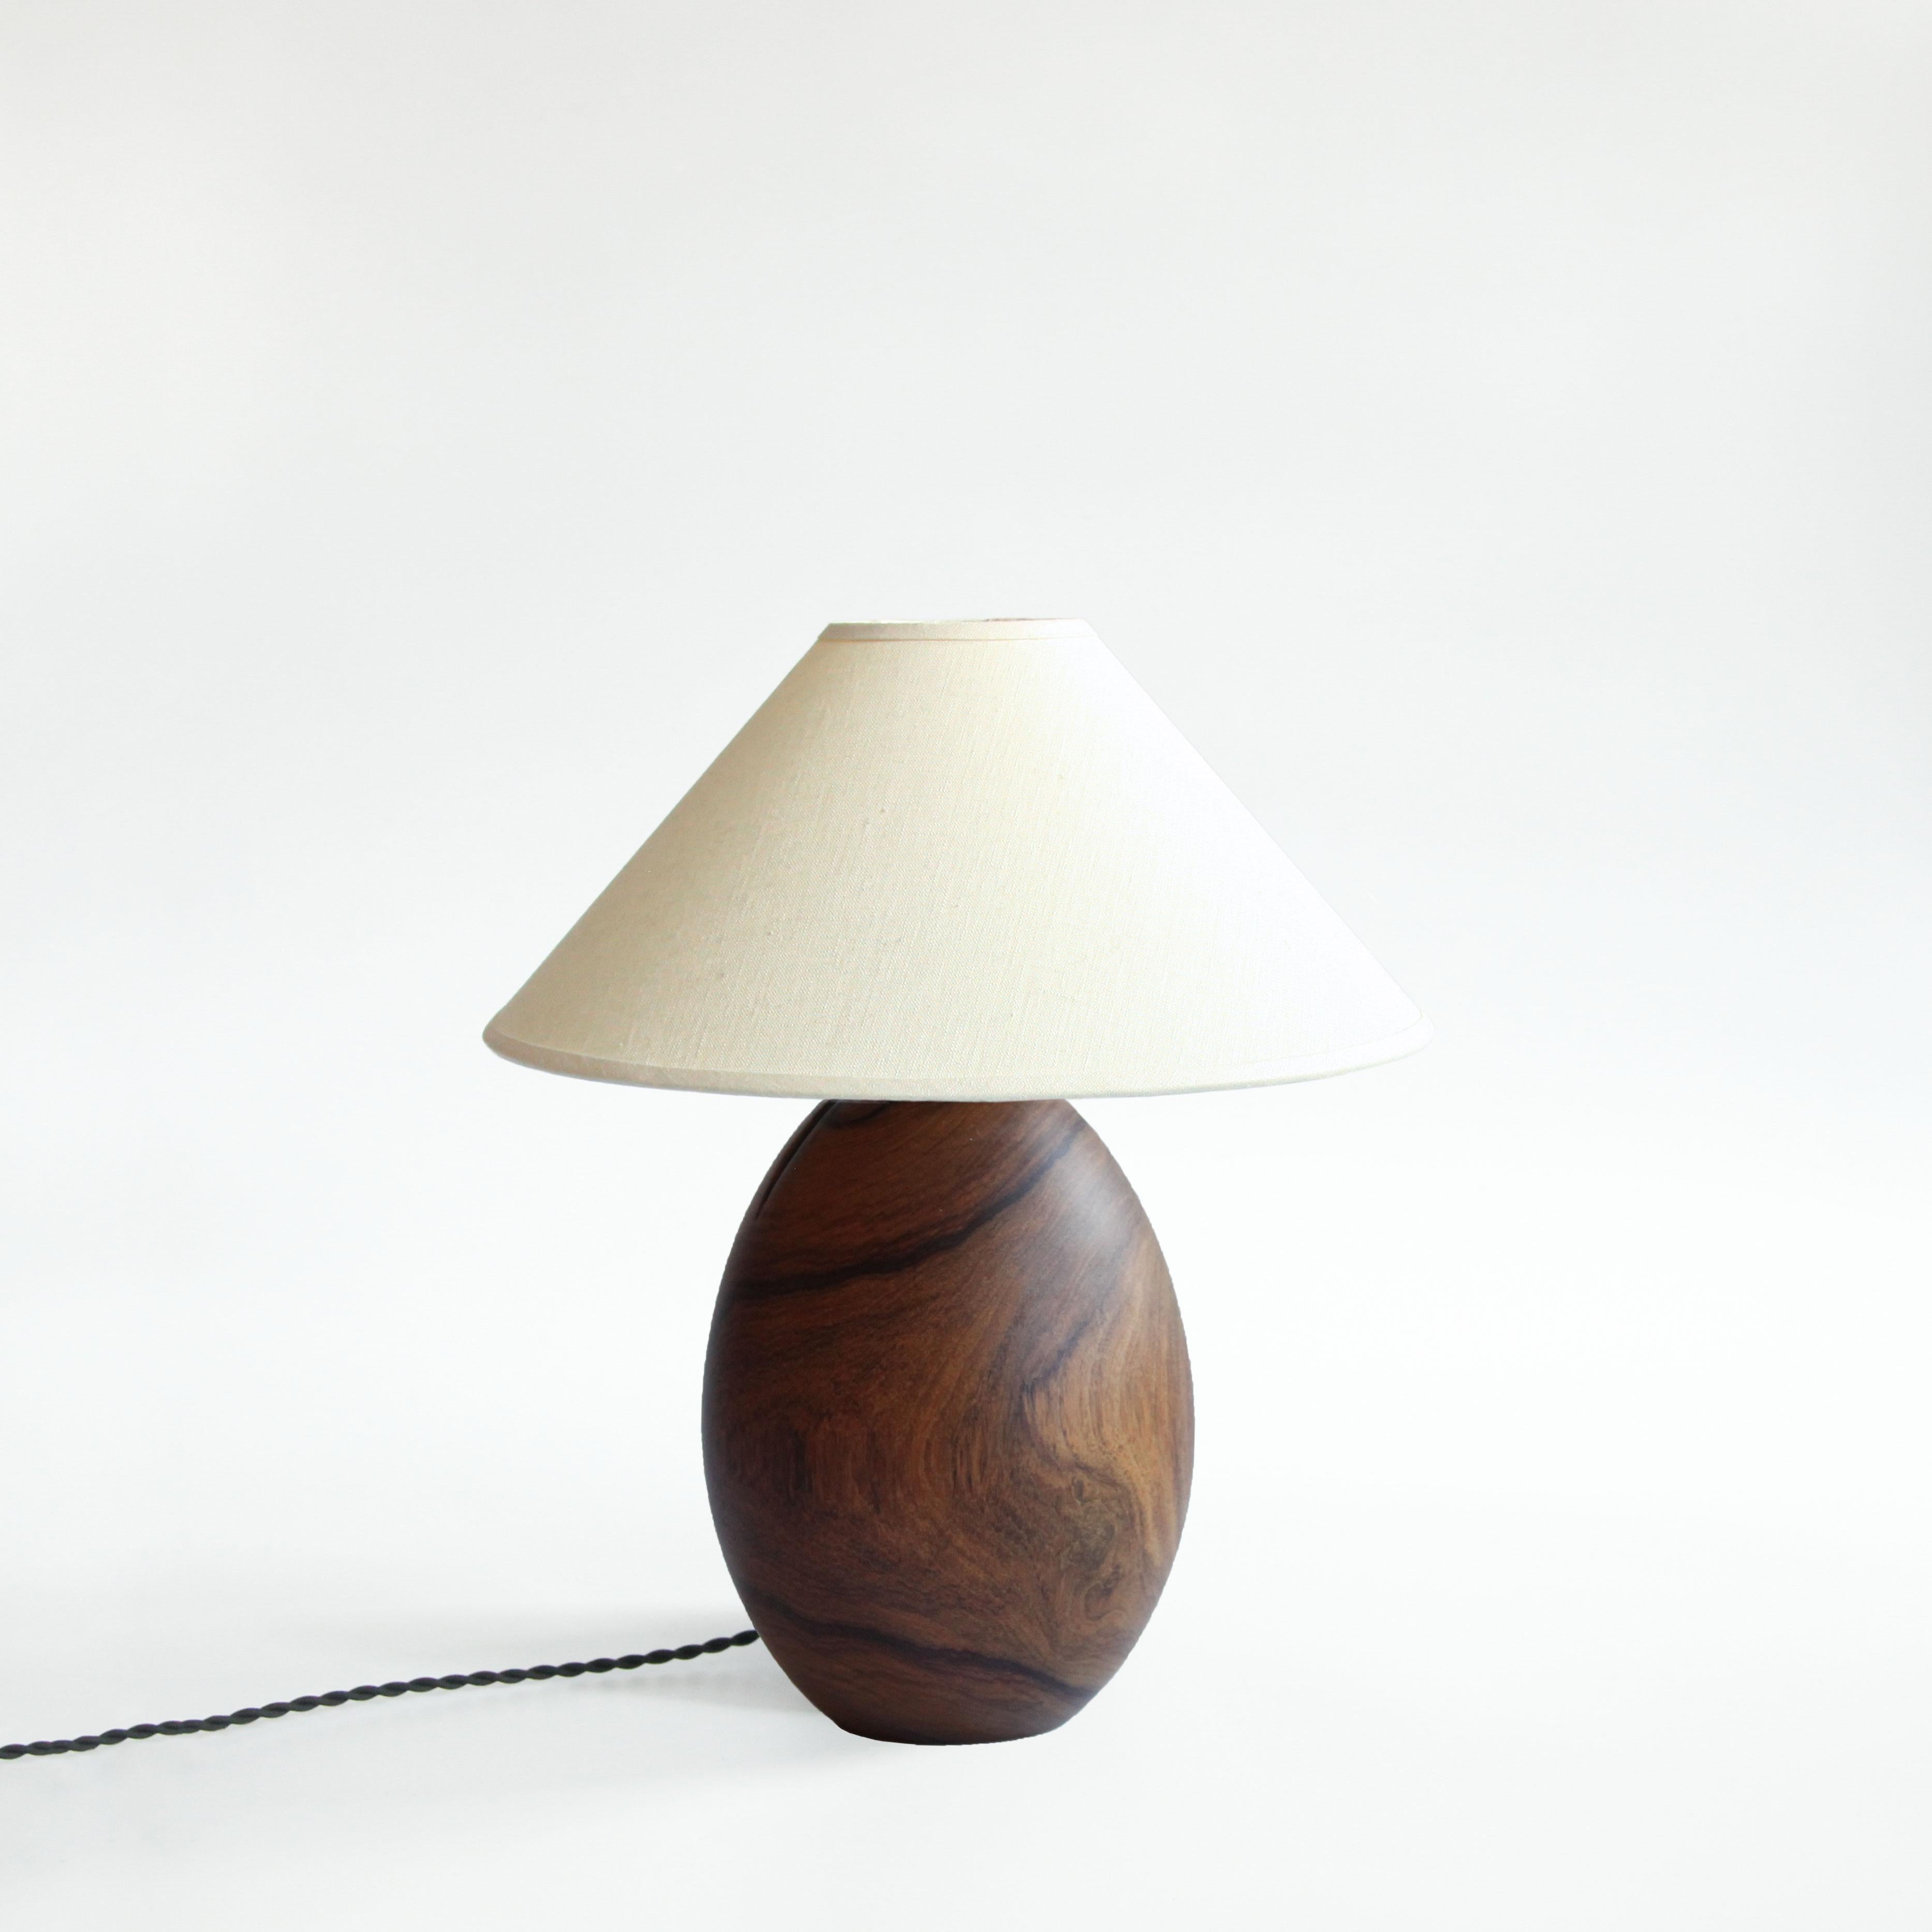 Mid-Century Modern Tropical Hardwood Lamp and White Linen Shade, Small Medium, Árbol Collection, 25